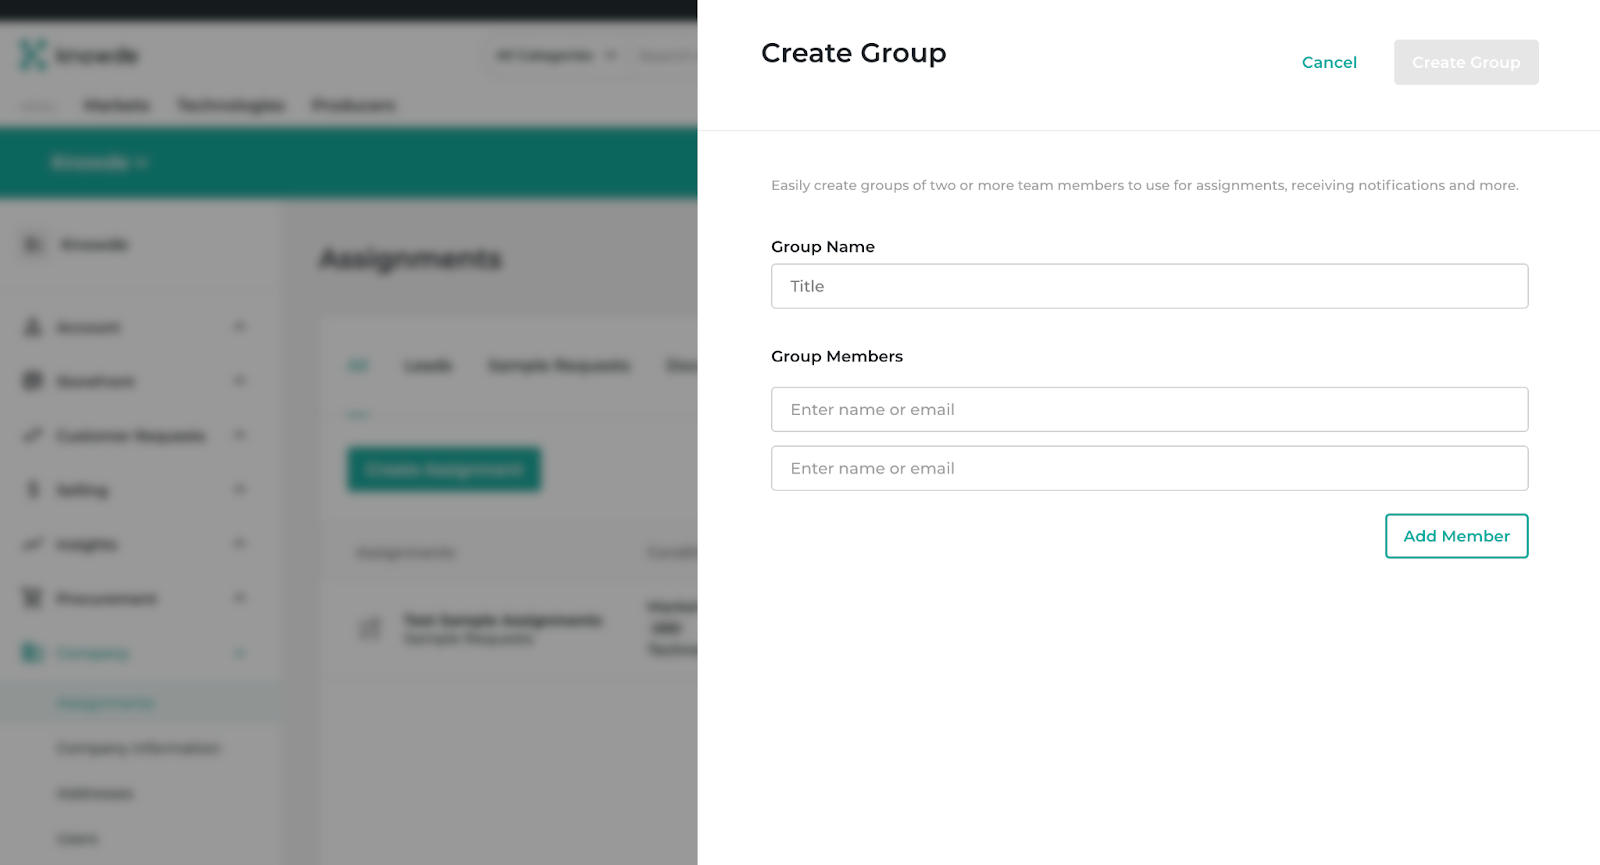 Chemical suppliers can create groups of users within the Assignments page, reducing the time it takes for a lead or request to find the right person